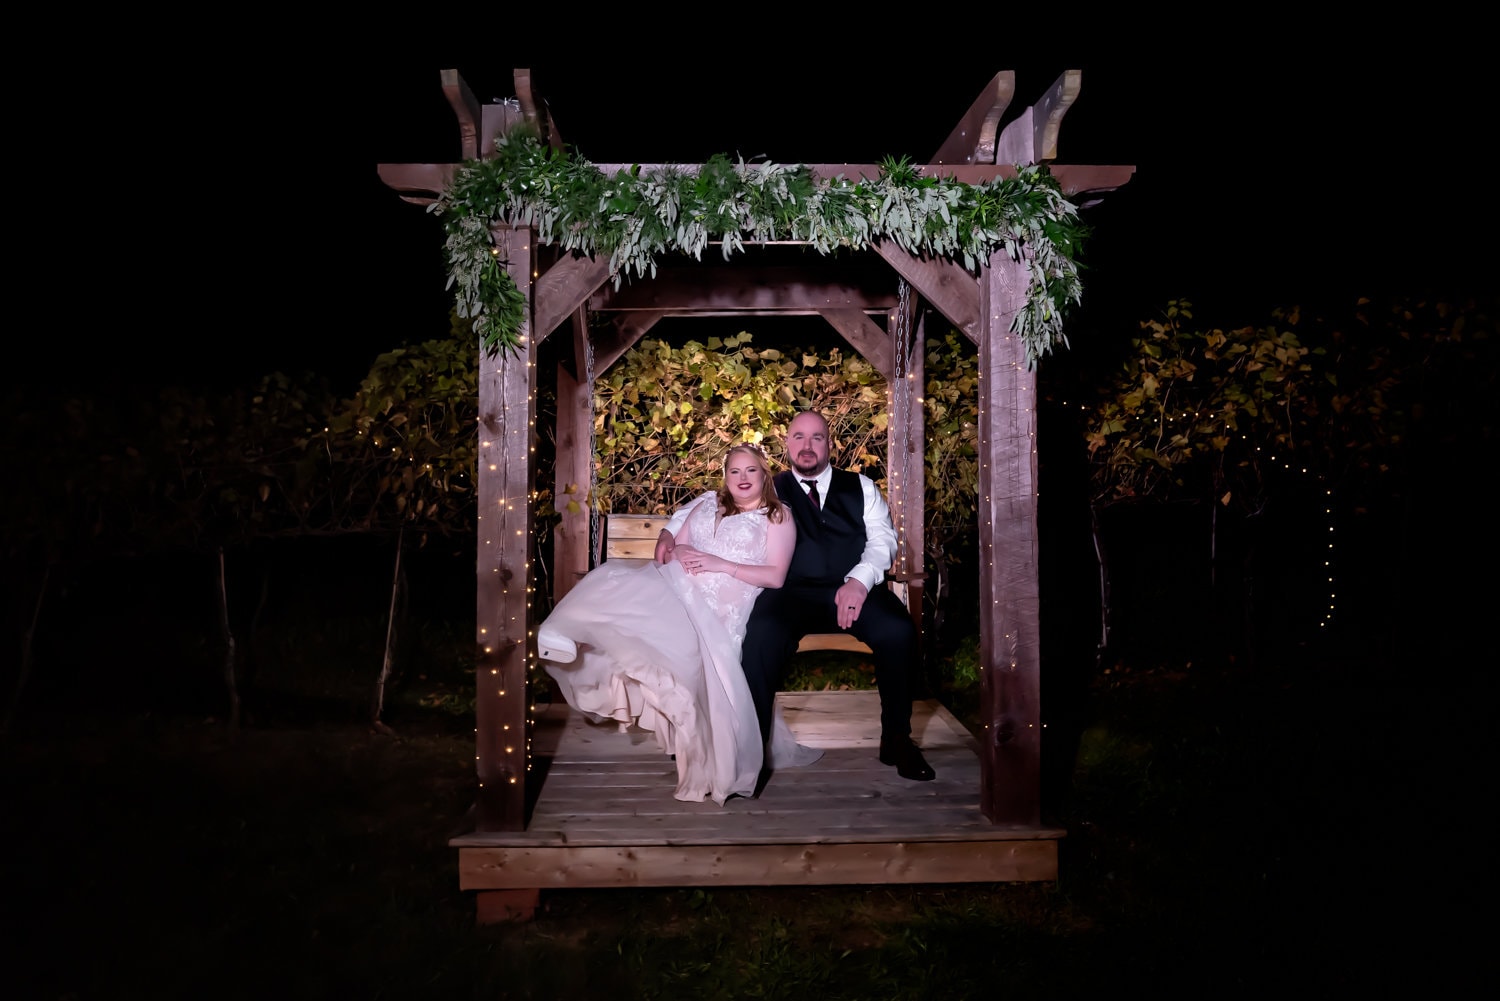 The bride and groom sit on a wooden swing and pose f or